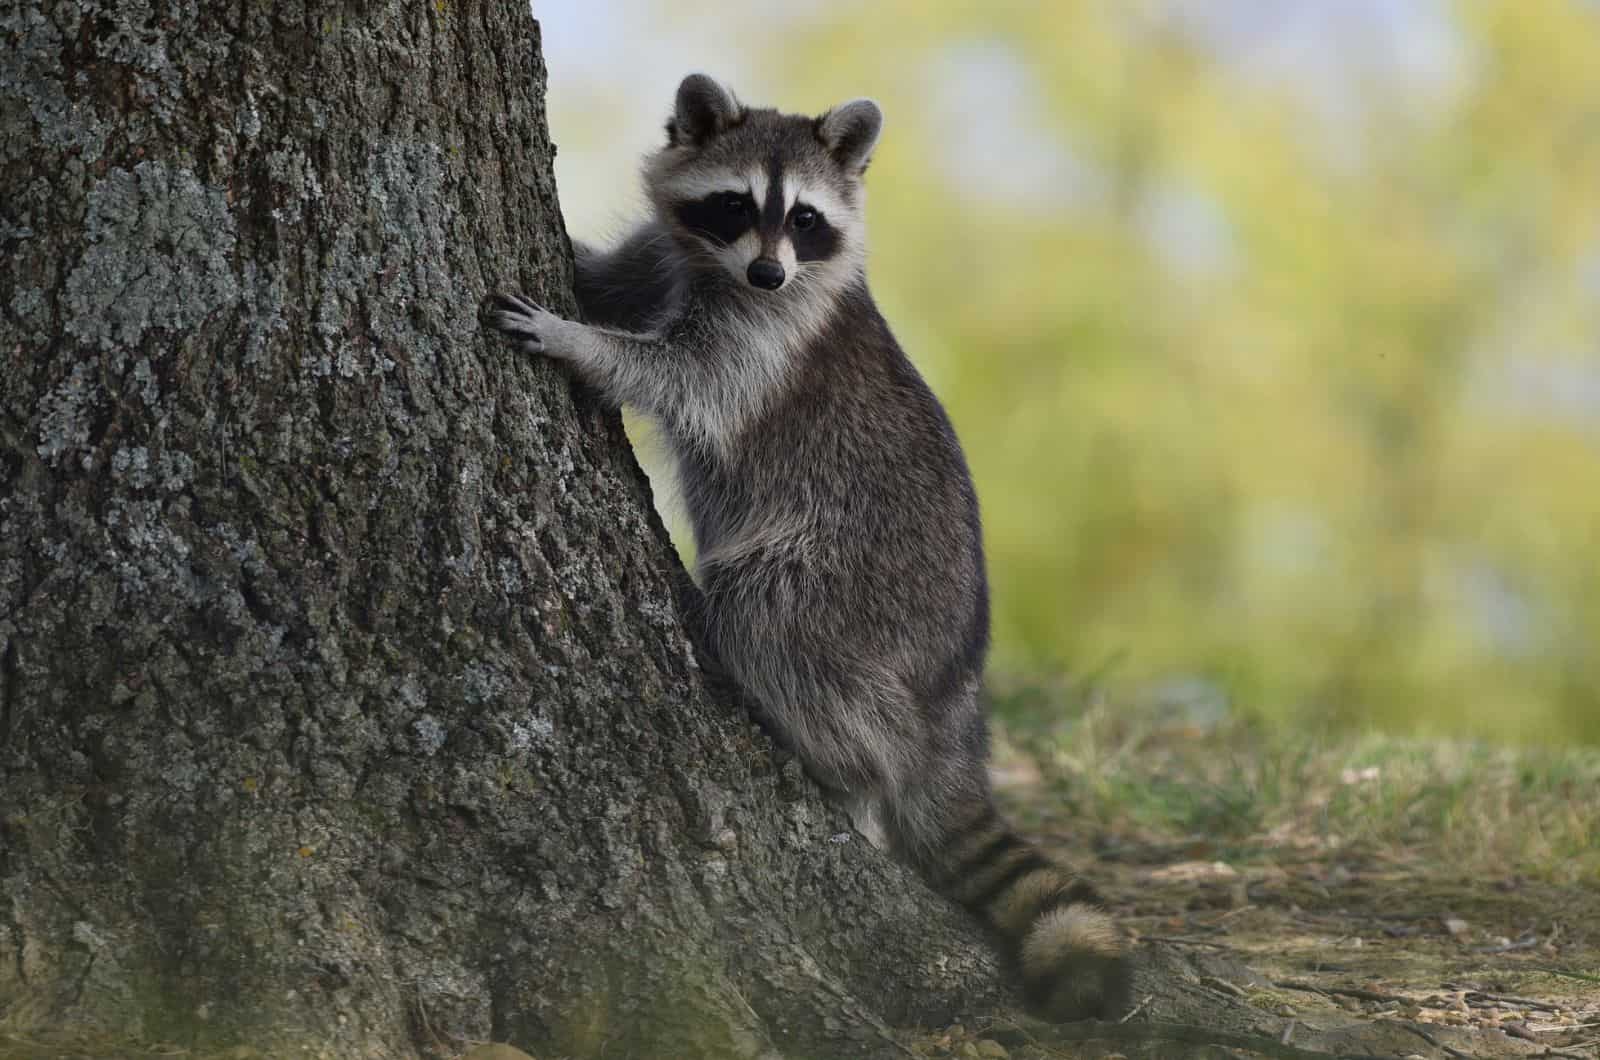 Raccoon standing by the tree